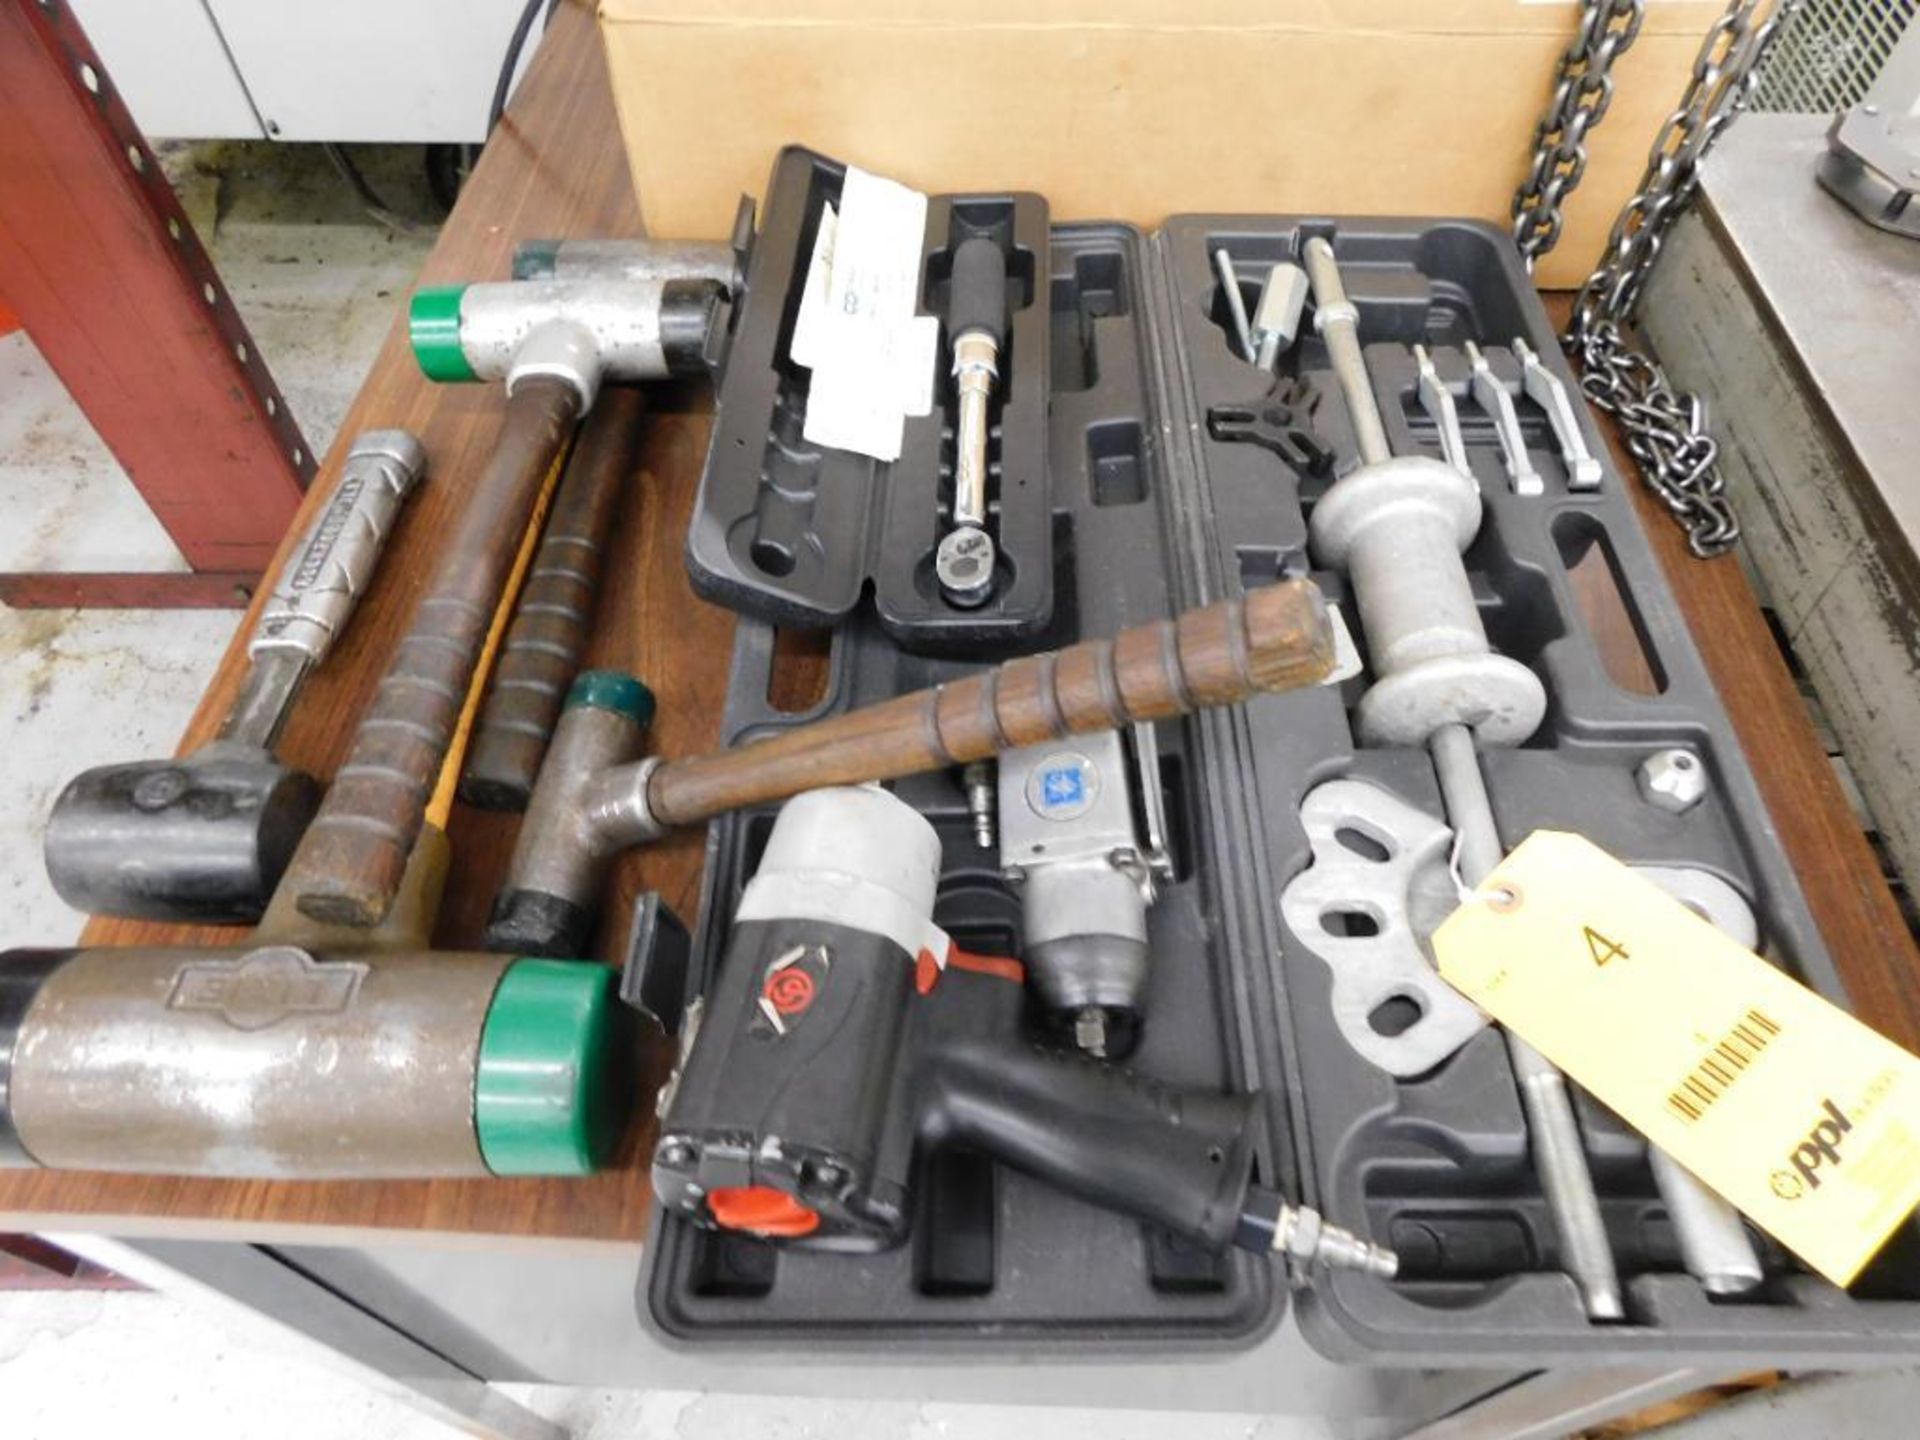 LOT: CDI Torque Wrench, Slide Hammer Mallets, 1/2 in. Pneumatic Impact Wrench, 3/8 in. Butterfly Wre